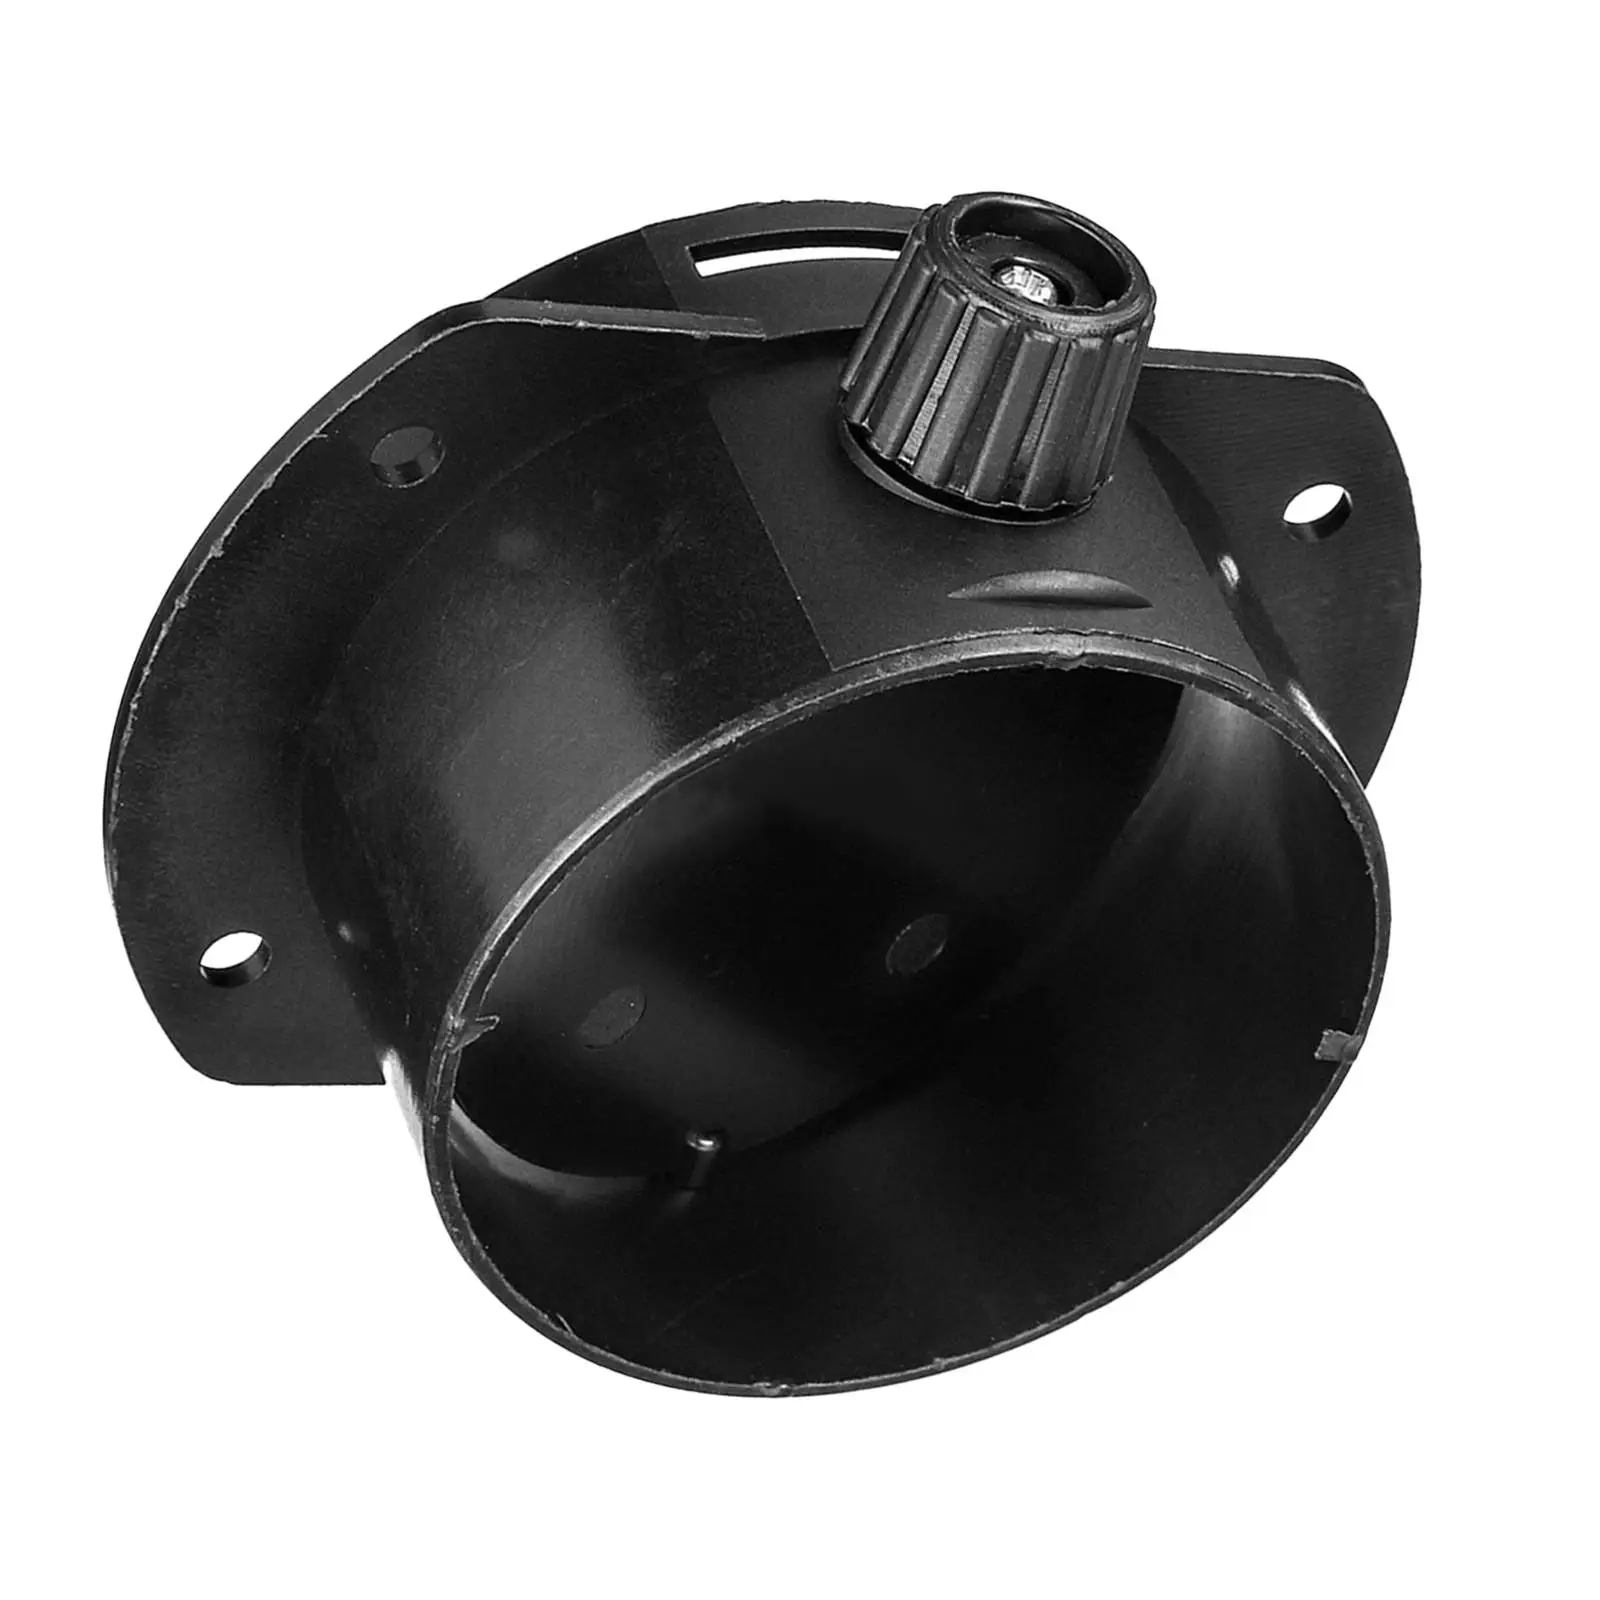 Auto Closeable Open Regulating Valve 90mm Air Vent Ducting Connector Valve for Parking Heater Bus RV Spare Parts